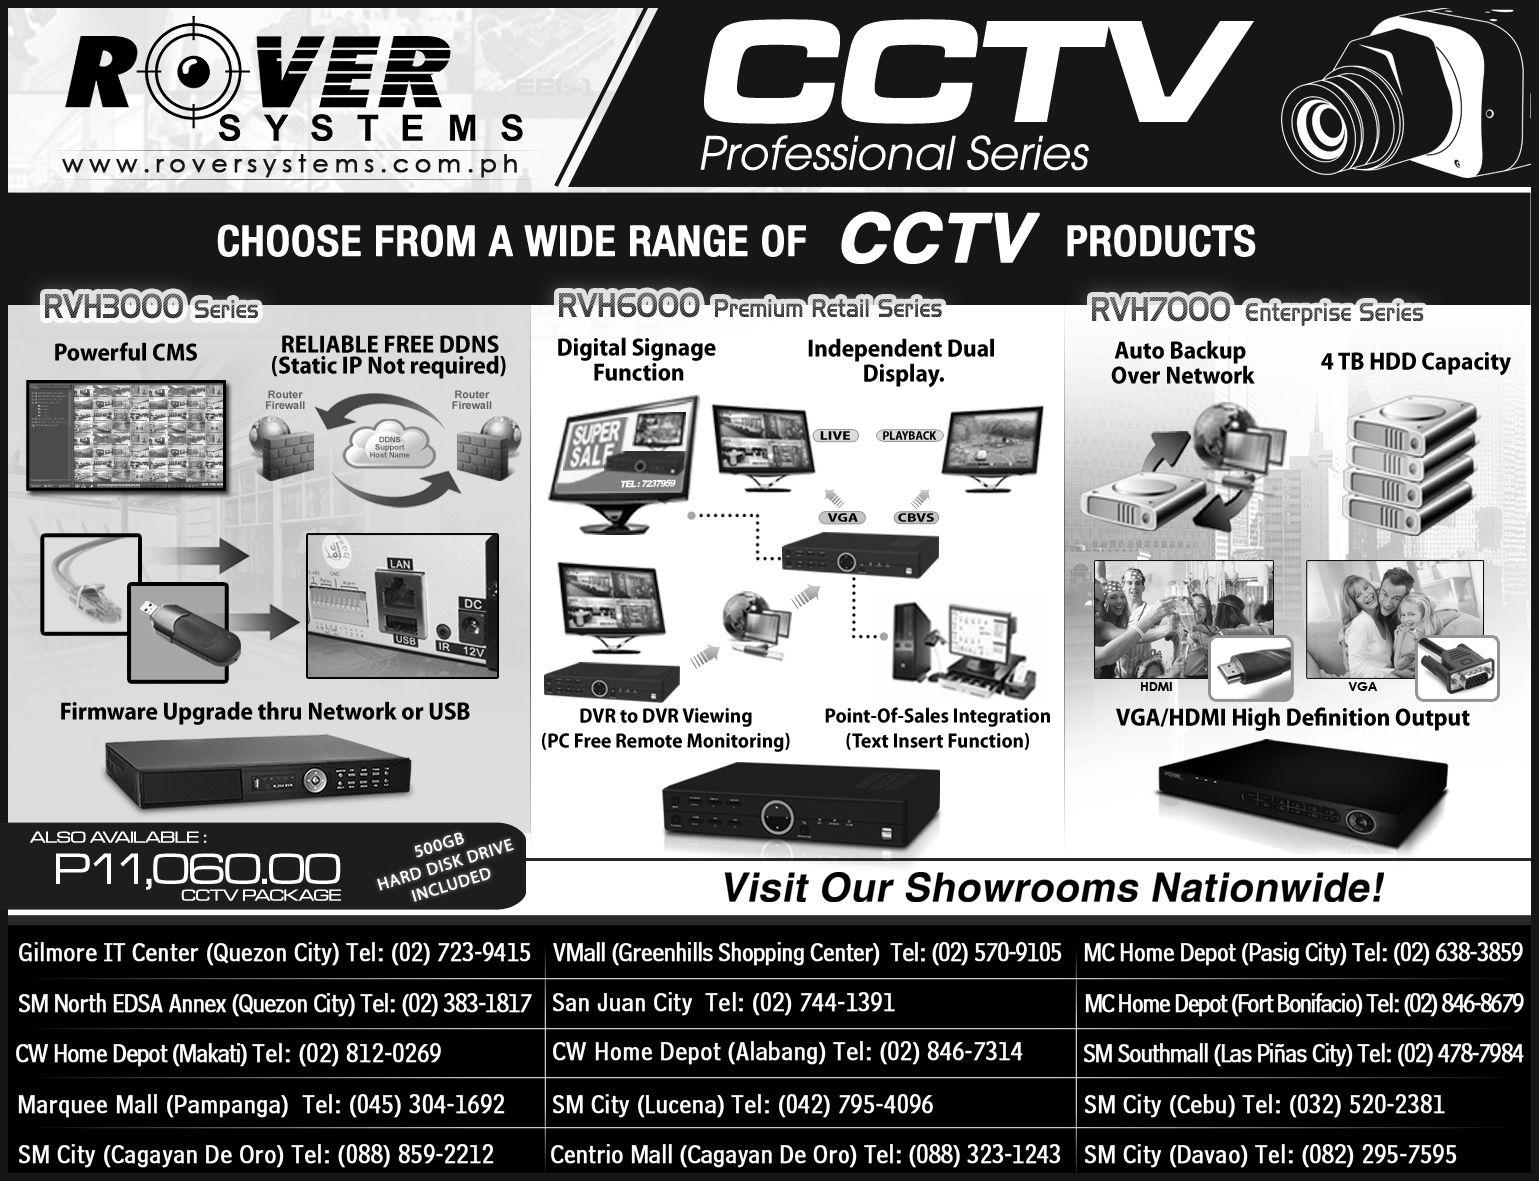 Rover CCTV Logo - Rover Systems Newspaper Ad (June 2013) Philippines